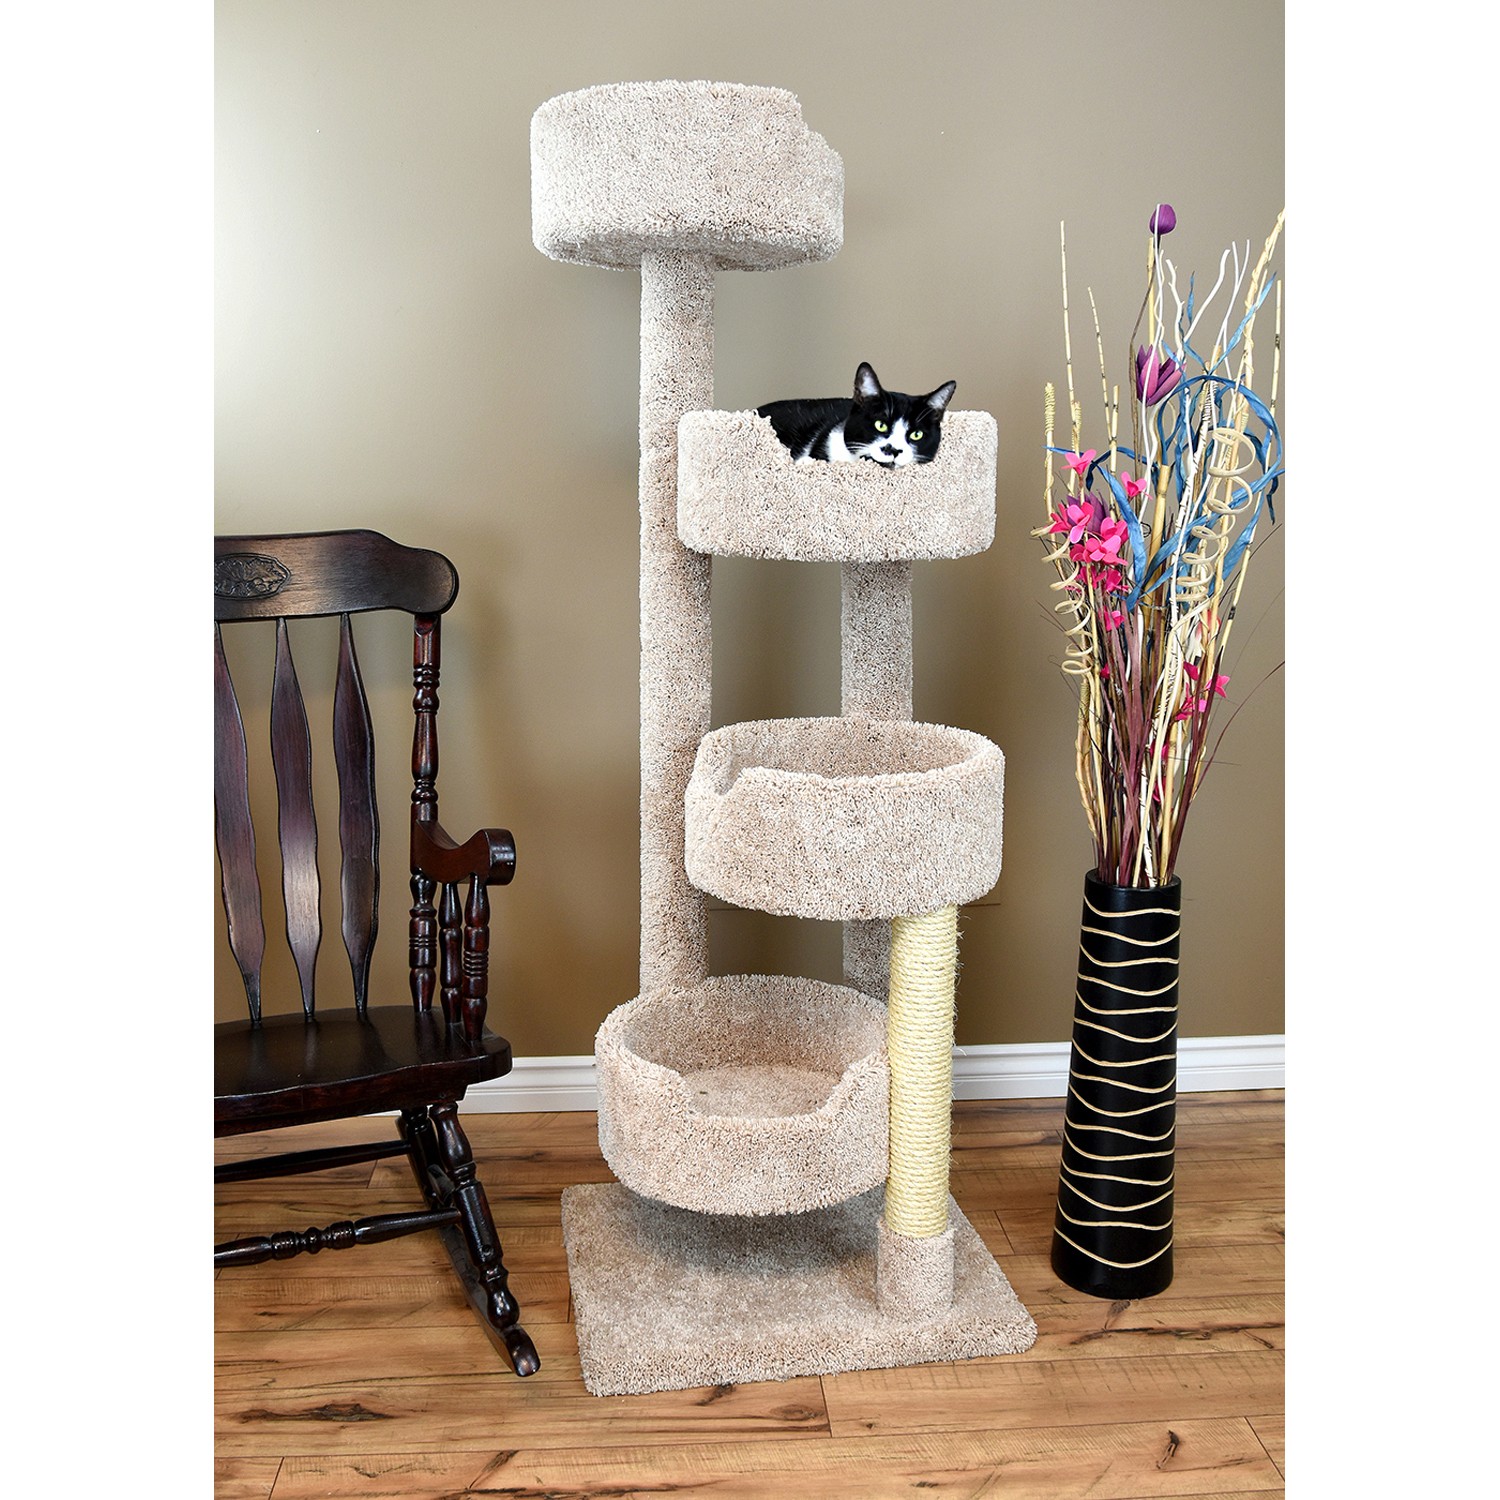 Compact Cat Condo With A Stairway